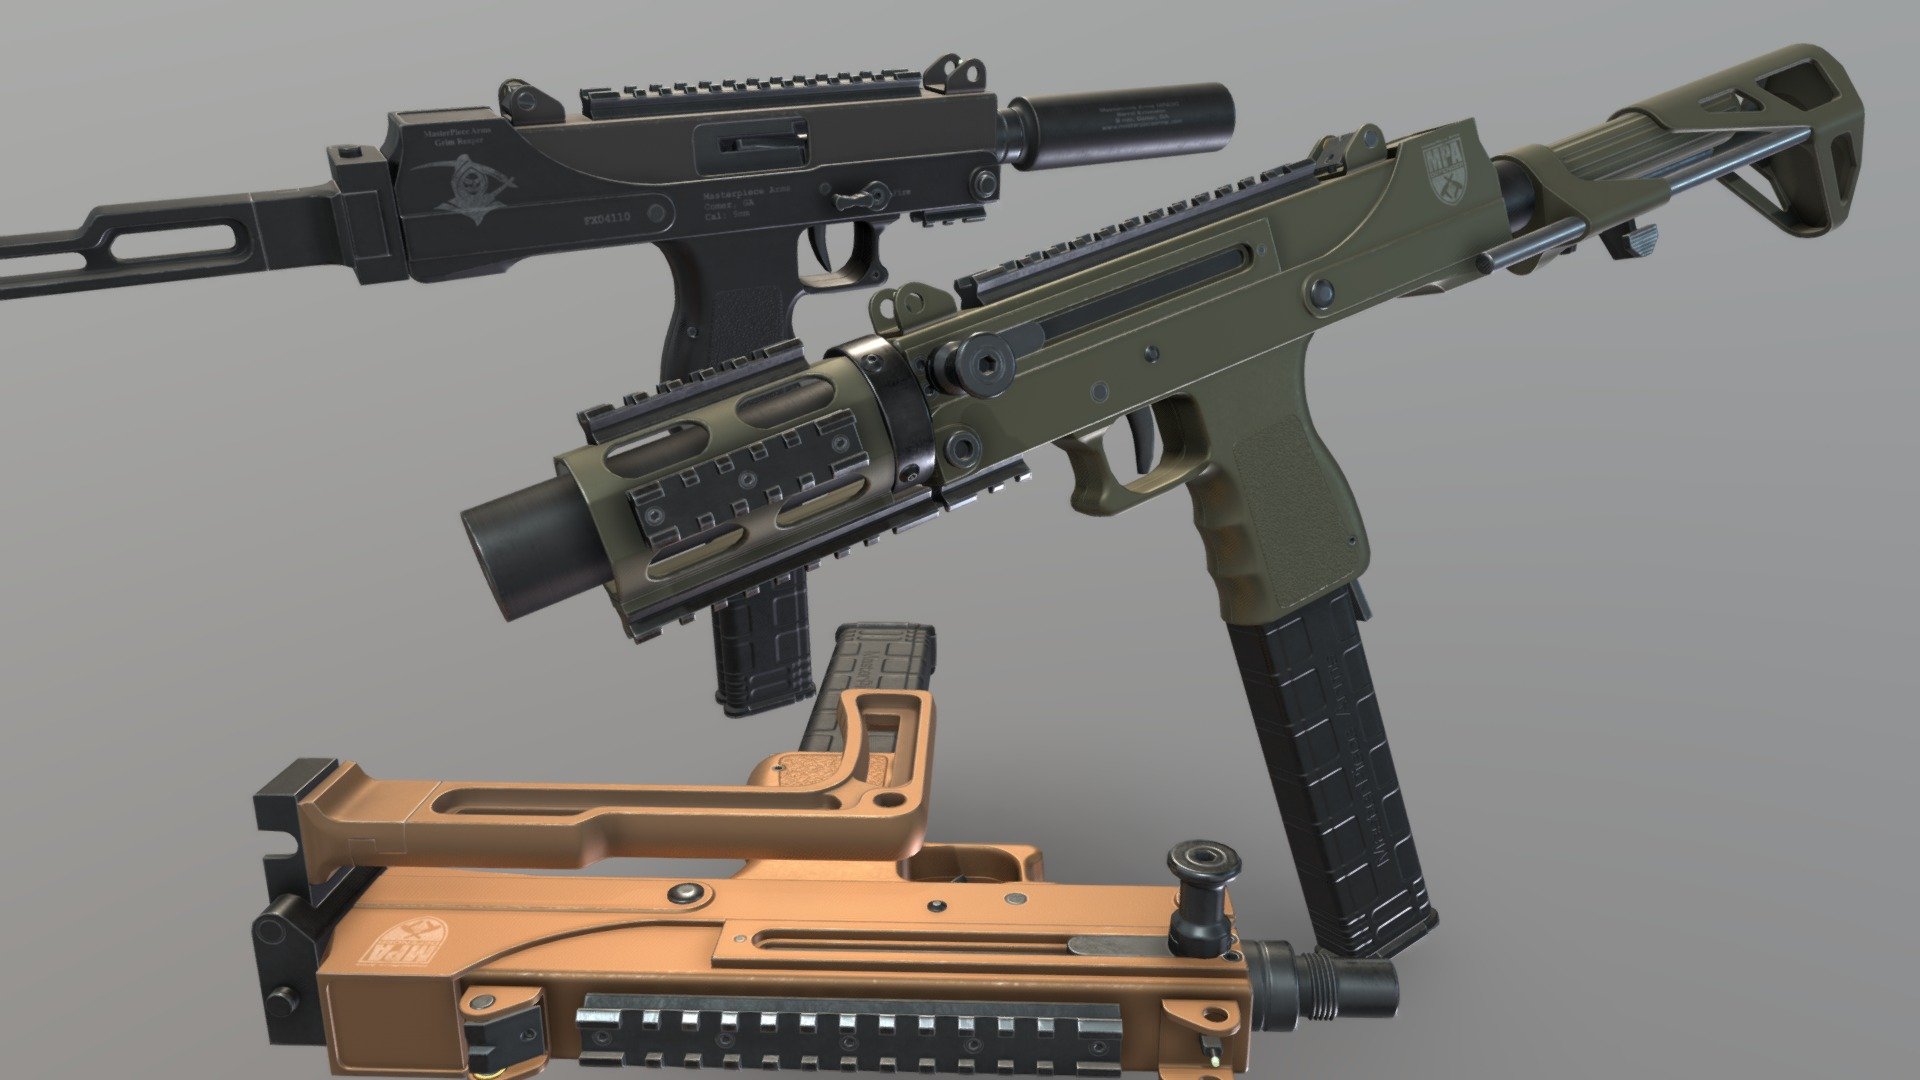 Game-ready low-poly PBR model

Three color options:


Black
Flat Dark Earth
Olive Drab Green

Poly / Verts Count:


Masterpiece 30 SST: 9439 / 5226
Handguard + Barrel Extension: 3810 / 2004
MPA Folding Stock: 2188 / 1152
Maxim Defense CQB Gen 7 Stock: 2374 / 1255
Total: 17811 / 9637
 - Masterpiece Arms 30 SST SMG - Download Free 3D model by eNse7en 3d model